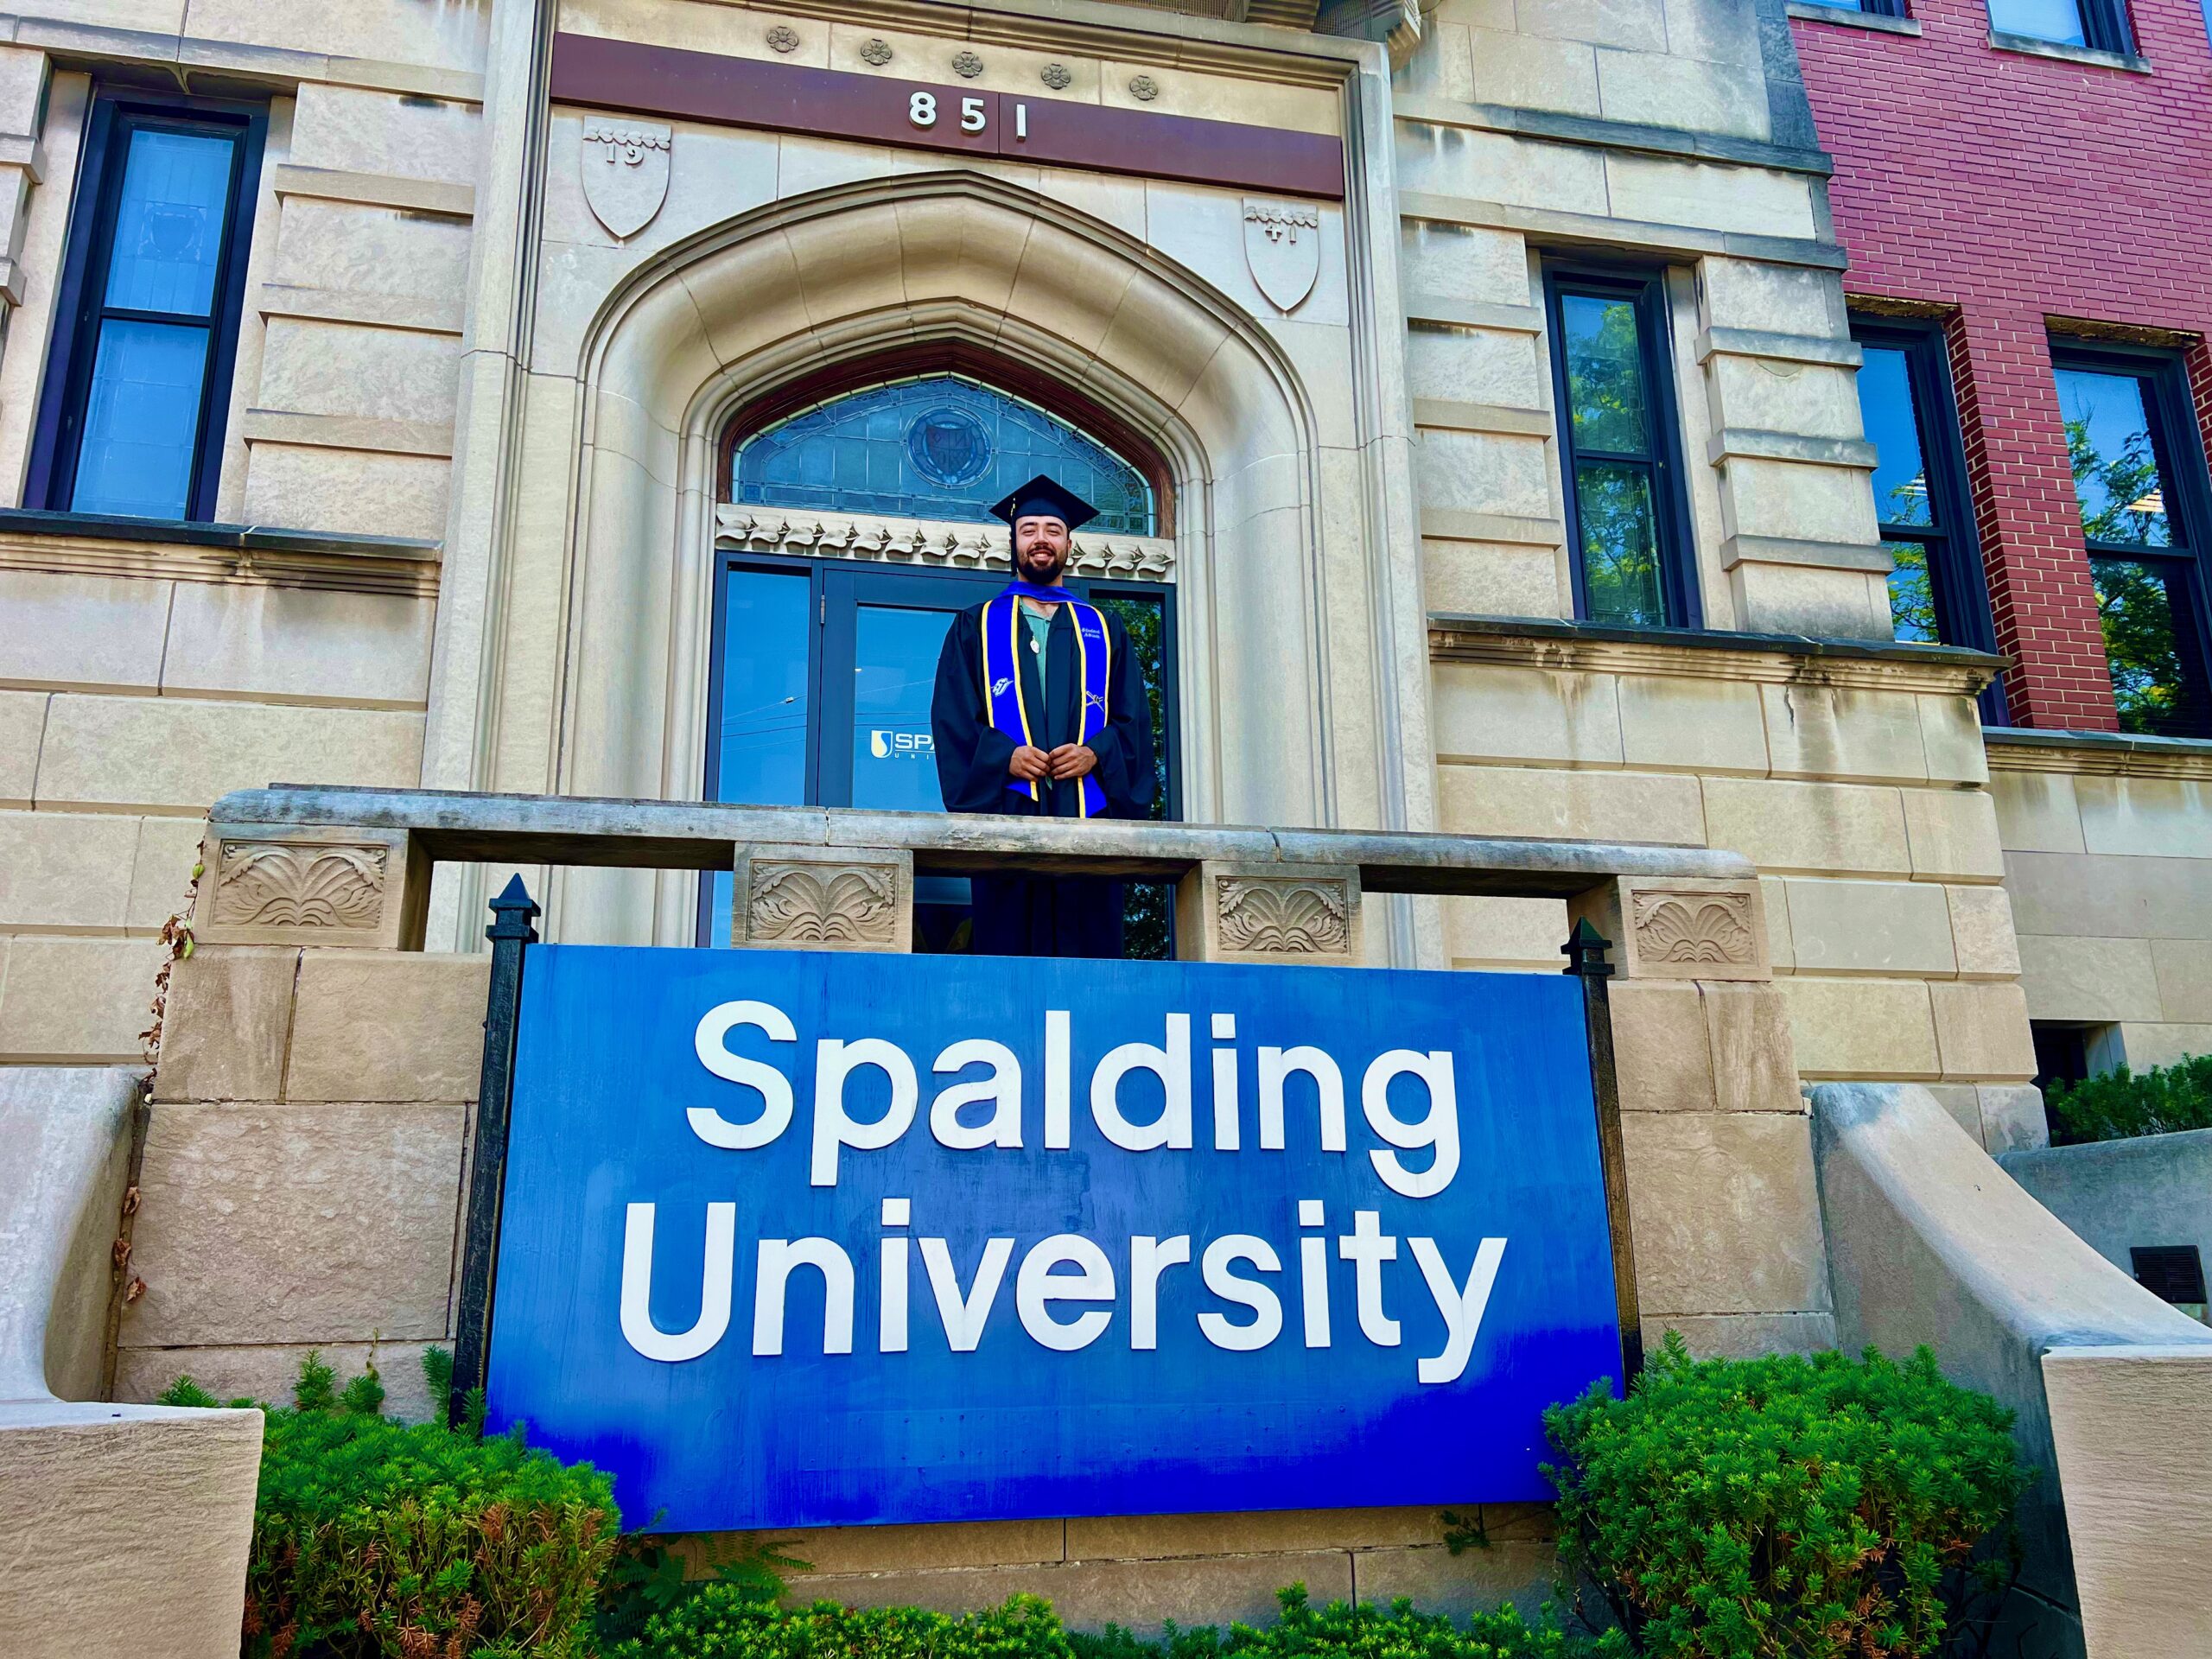 Spalding master's graduate behind Spalding University sign at the mansion's front doors